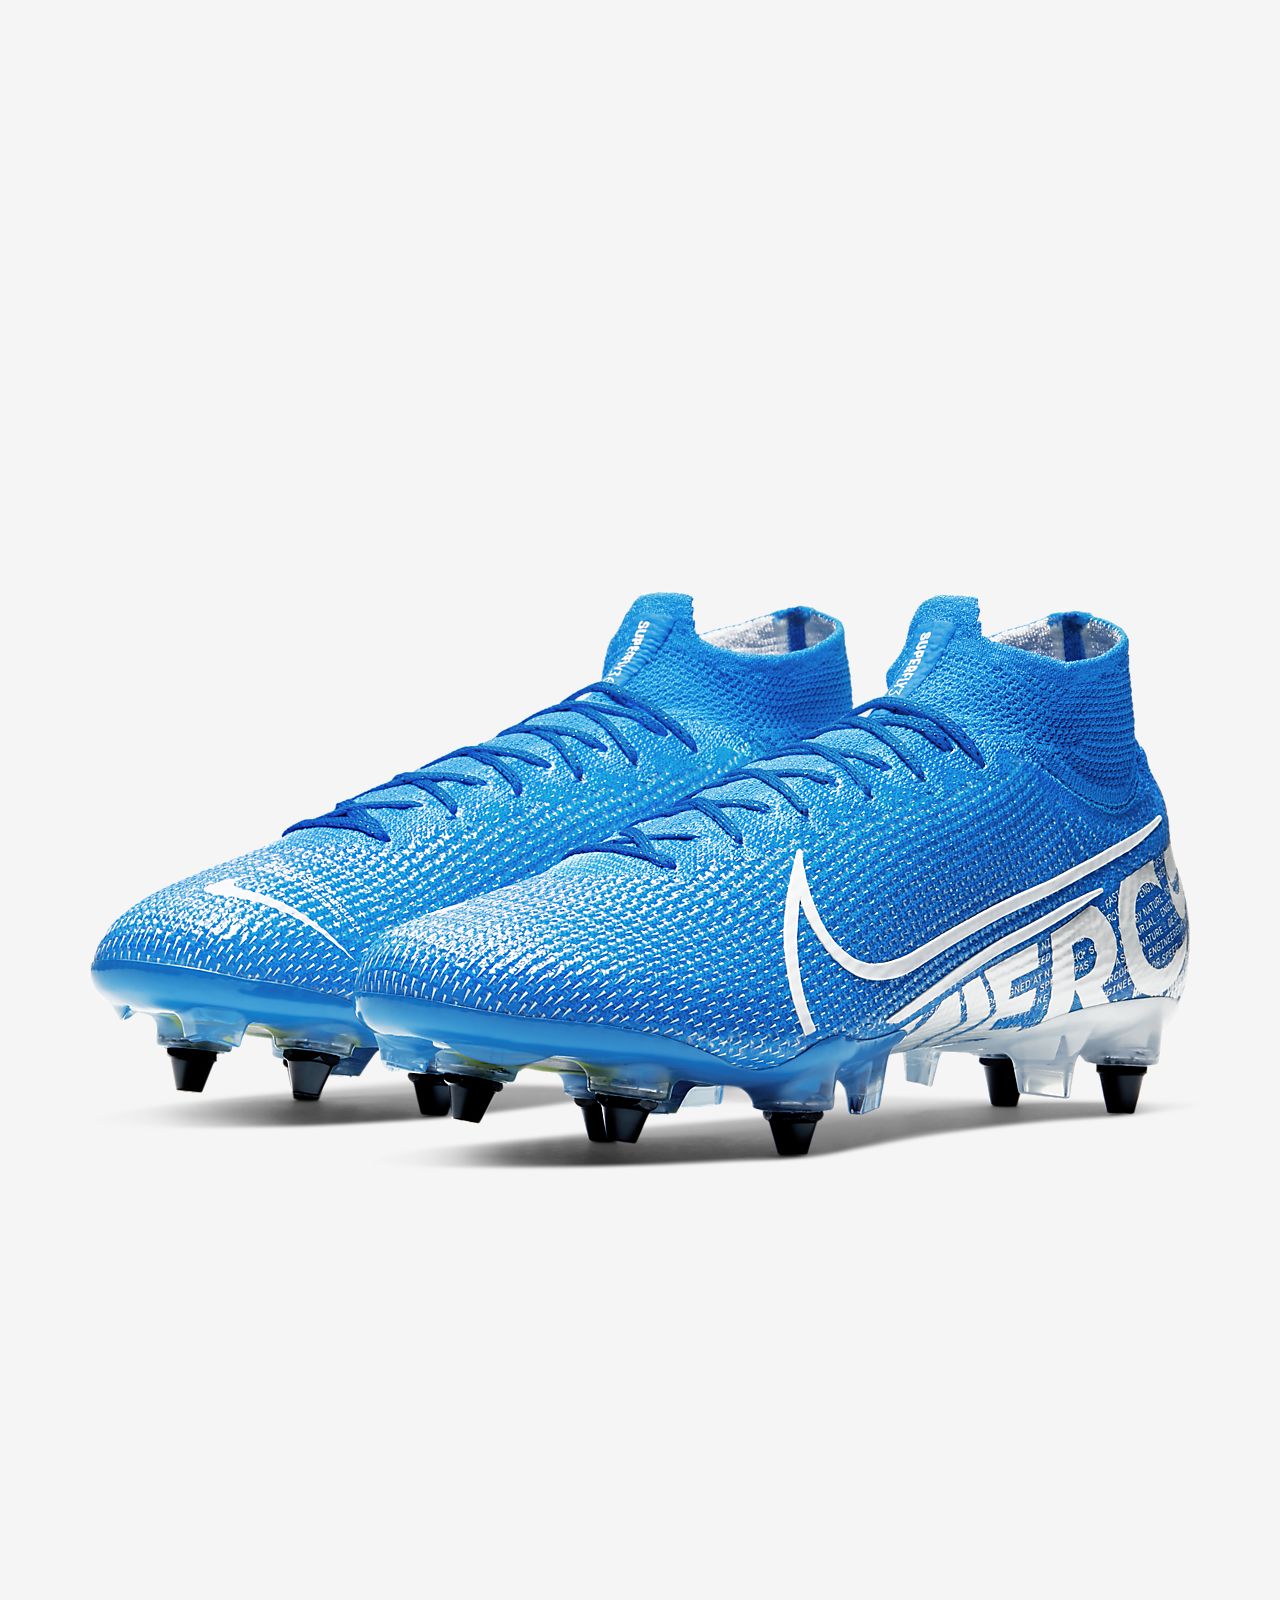 Nike Mercurial Superfly 7 Elite FG Soccer Cleat Product.